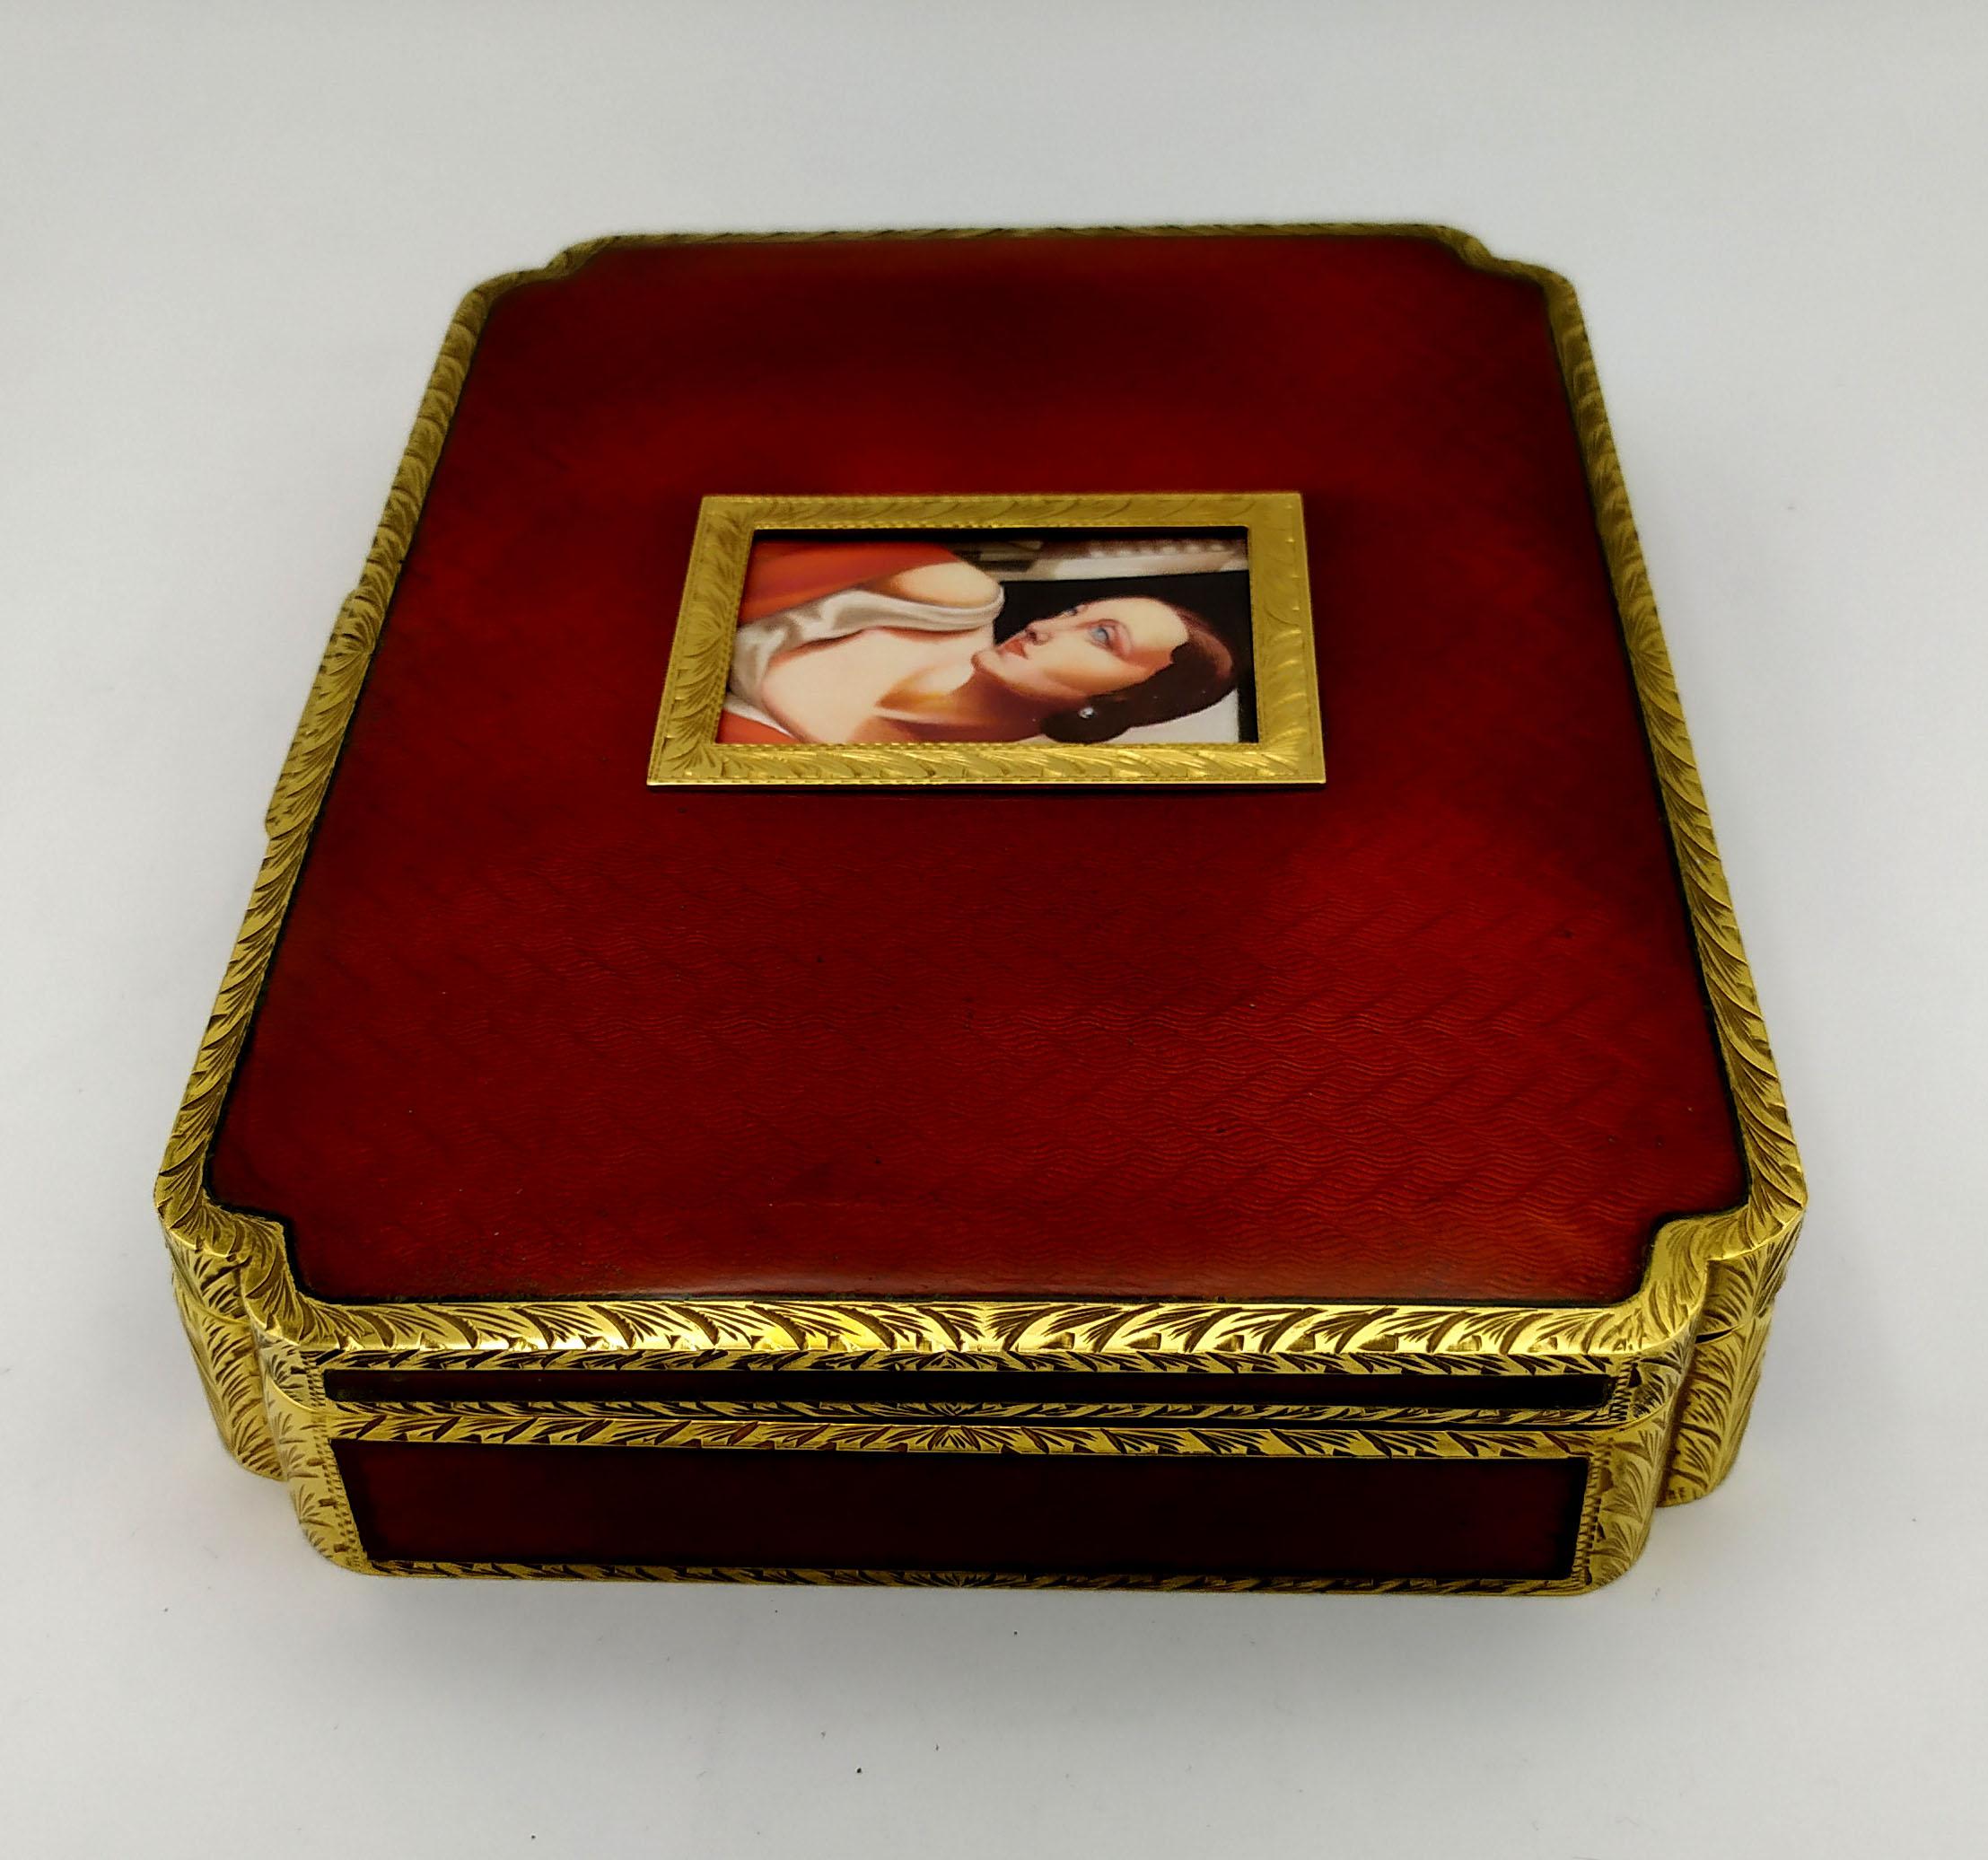 Large rectangular tabletop jewelery box with inward corners in gilded 925/1000 silver with translucent fired enamel on guillochè also on the sides and finished with fine hand engraving. In the center, a beautiful rectangular miniature cm. 4 x 5.5